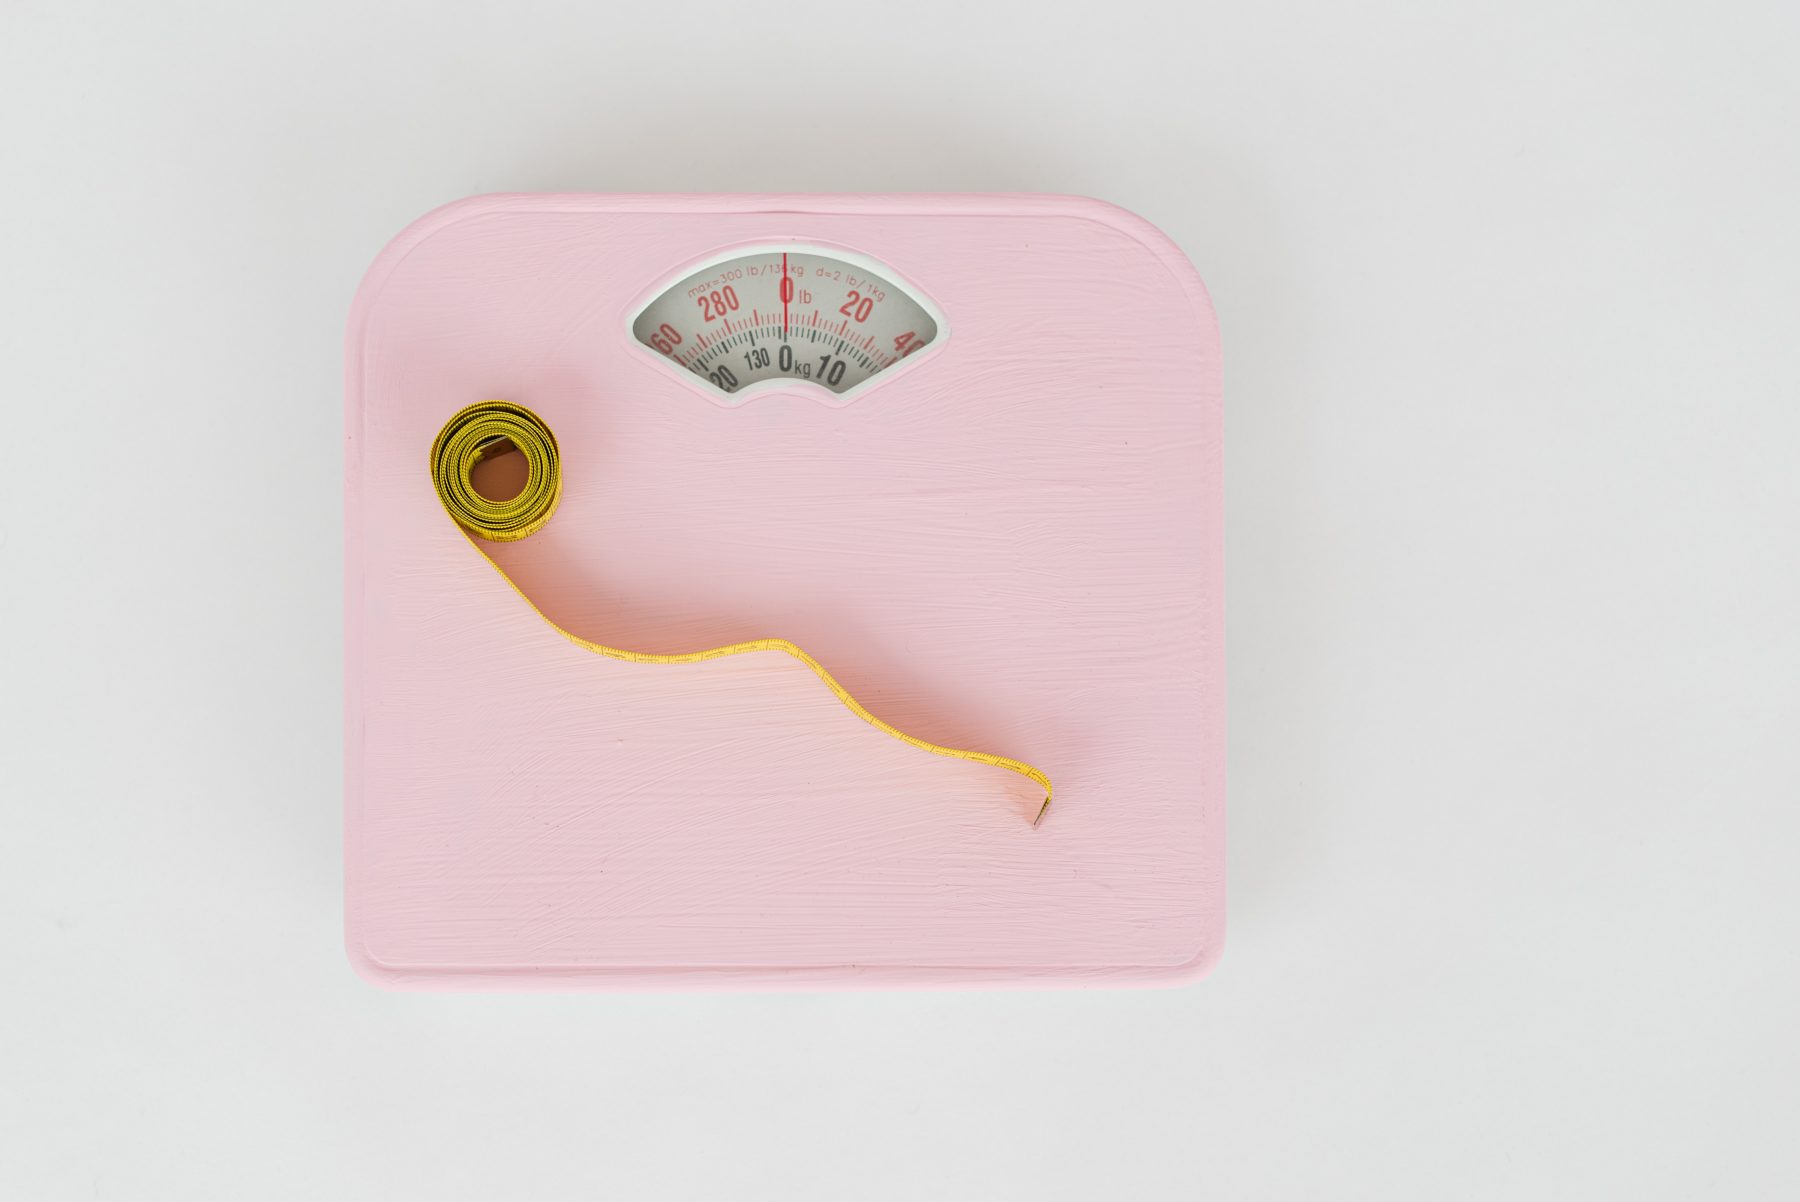 Measuring tape on a pink scale.